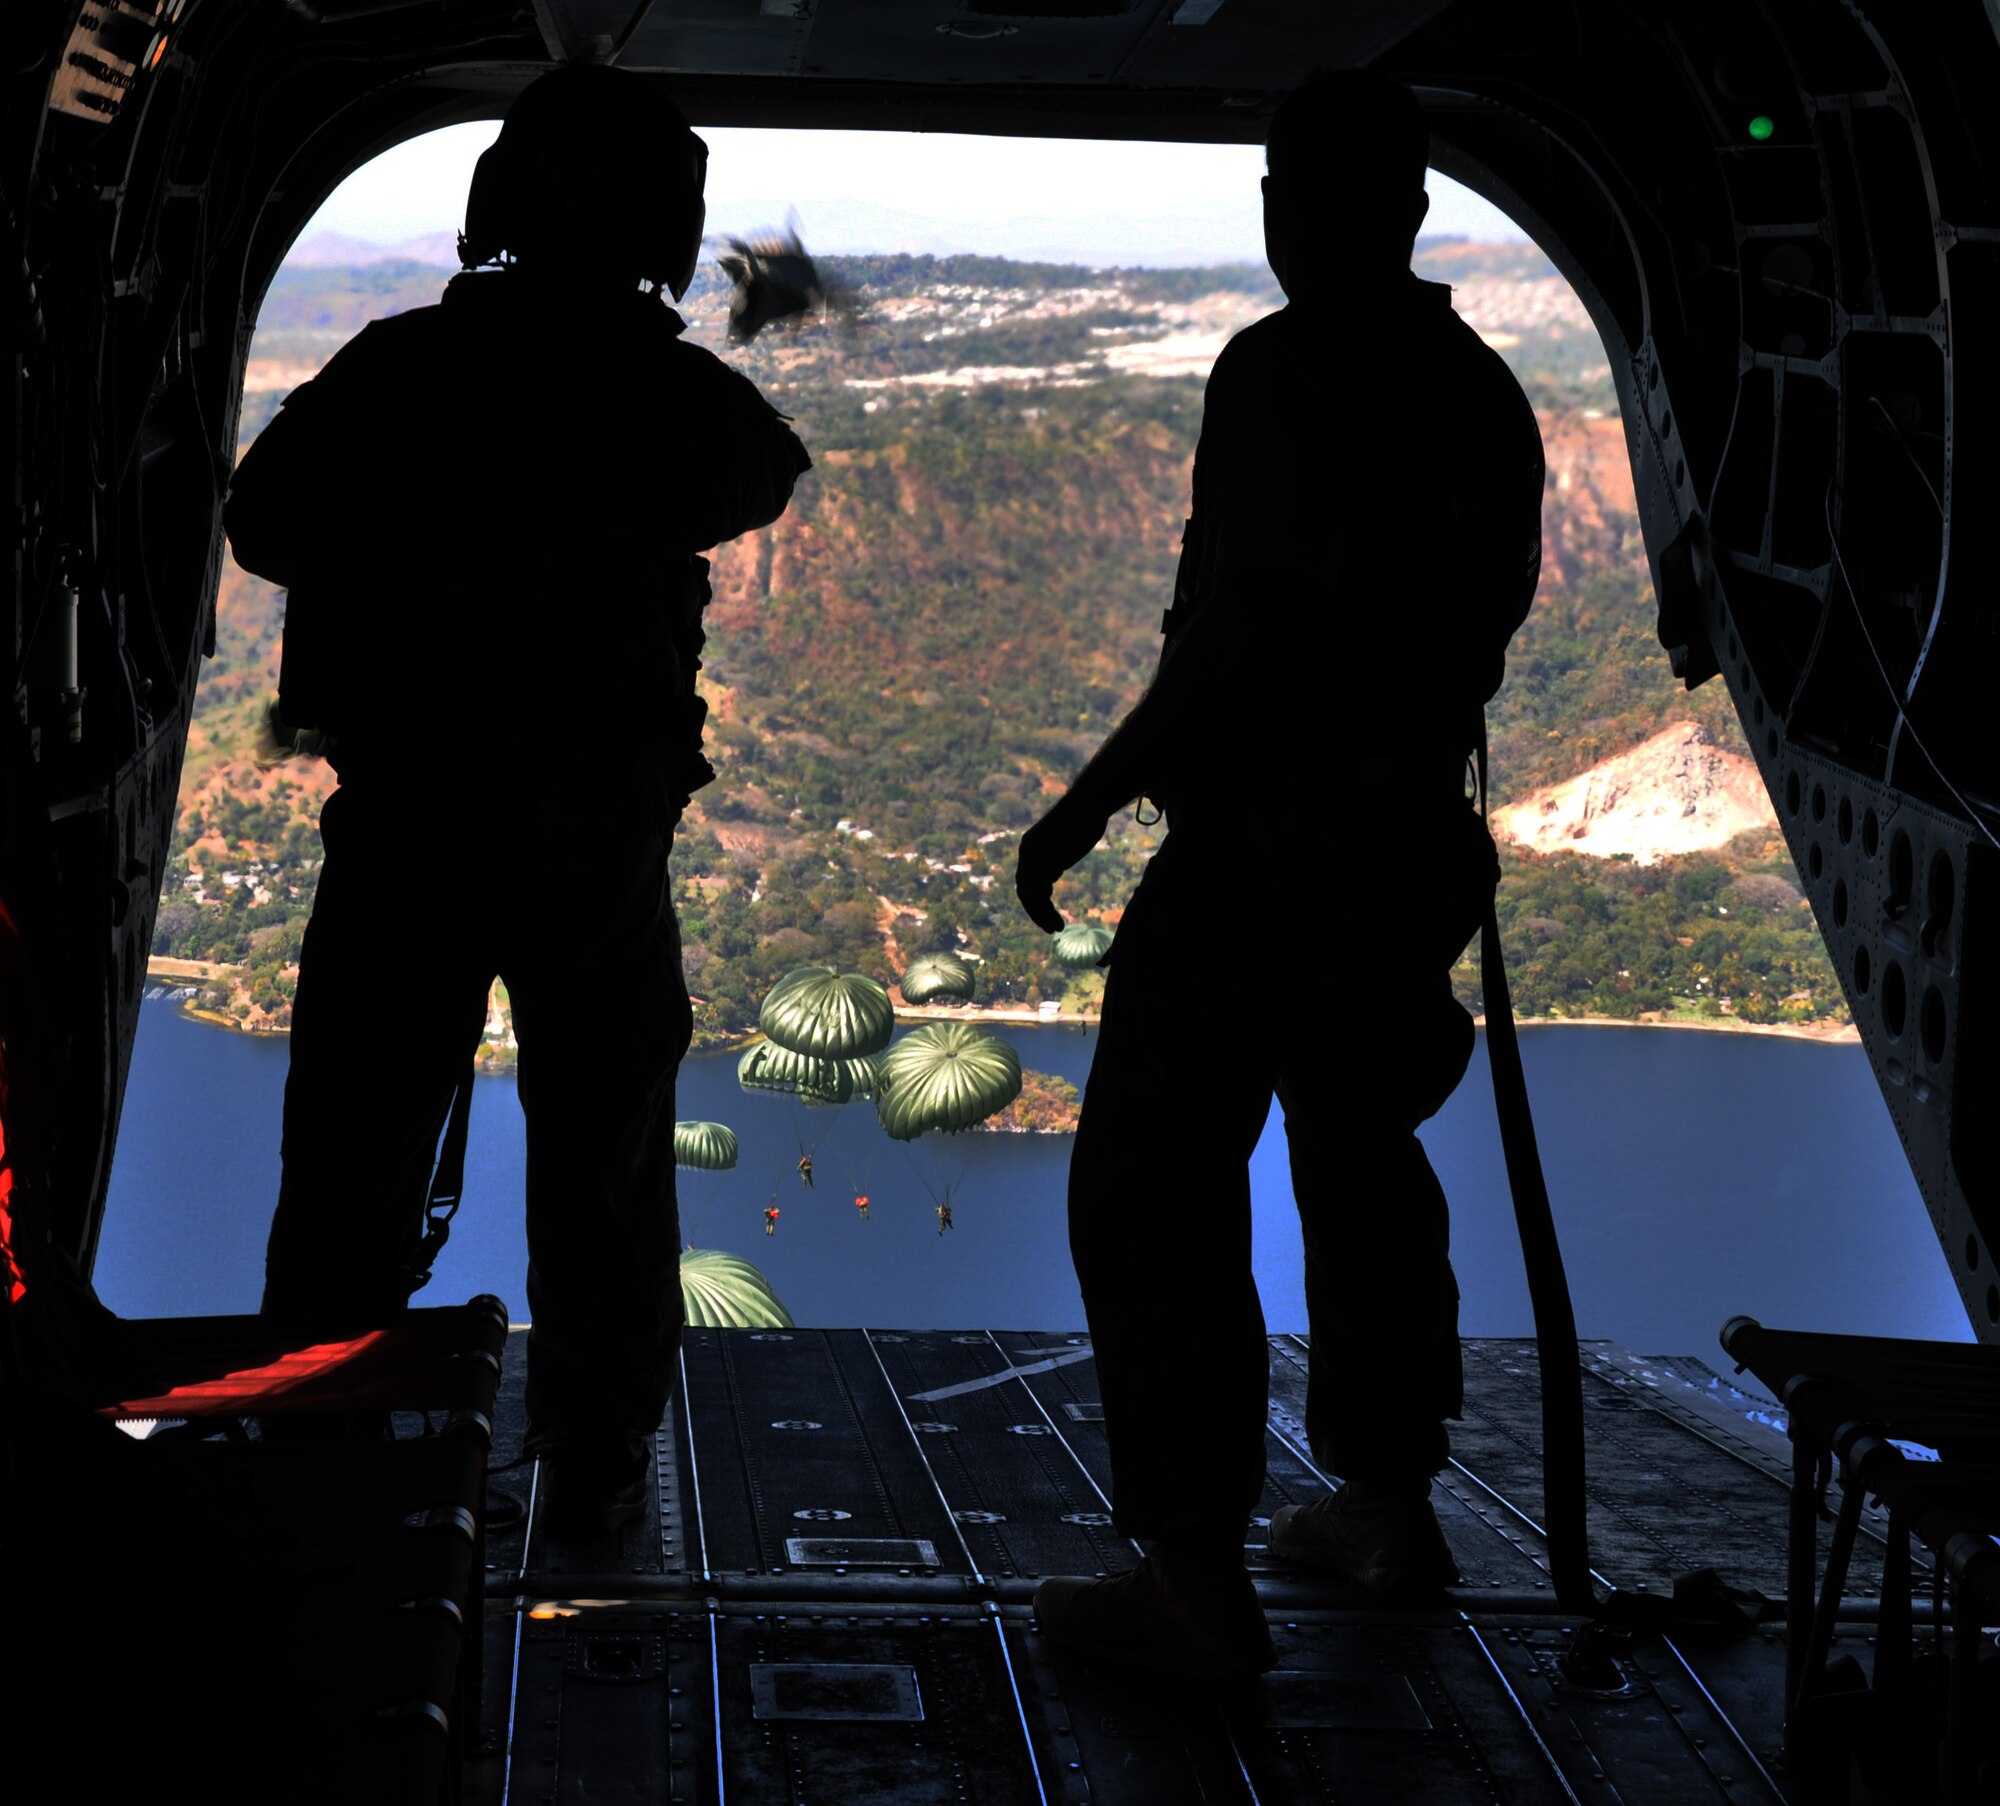 A crewchief and jumpmaster watch as U.S. Special Forces and El Salvadoran military members maneuver under canopy after jumping from the ramp of a CH-47 Chinook helicopter at an altitude of 1,250 feet during a joint airborne operations training exercise conducted by U.S. Special Forces and El Salvadoran servicemembers over Lake Ilopango, El Salvador, Jan. 21, 2014.  U.S. Special Forces from the 7th Special Forces Group (Airborne) conducted the training exercise alongside members of the El Salvadoran military.  The joint-training, overwater static jump allowed members from both nations to maintain currency while strengthening the relationship between the U.S. and El Salvadoran forces.  Joint Task Force-Bravo’s 1-228th Aviation Regiment provided aerial support for the exercise, flying each chalk of jumpers from the Ilopango International Airport to the drop zone over Lake Ilopango.  (U.S. Air Force photo by Capt. Zach Anderson)